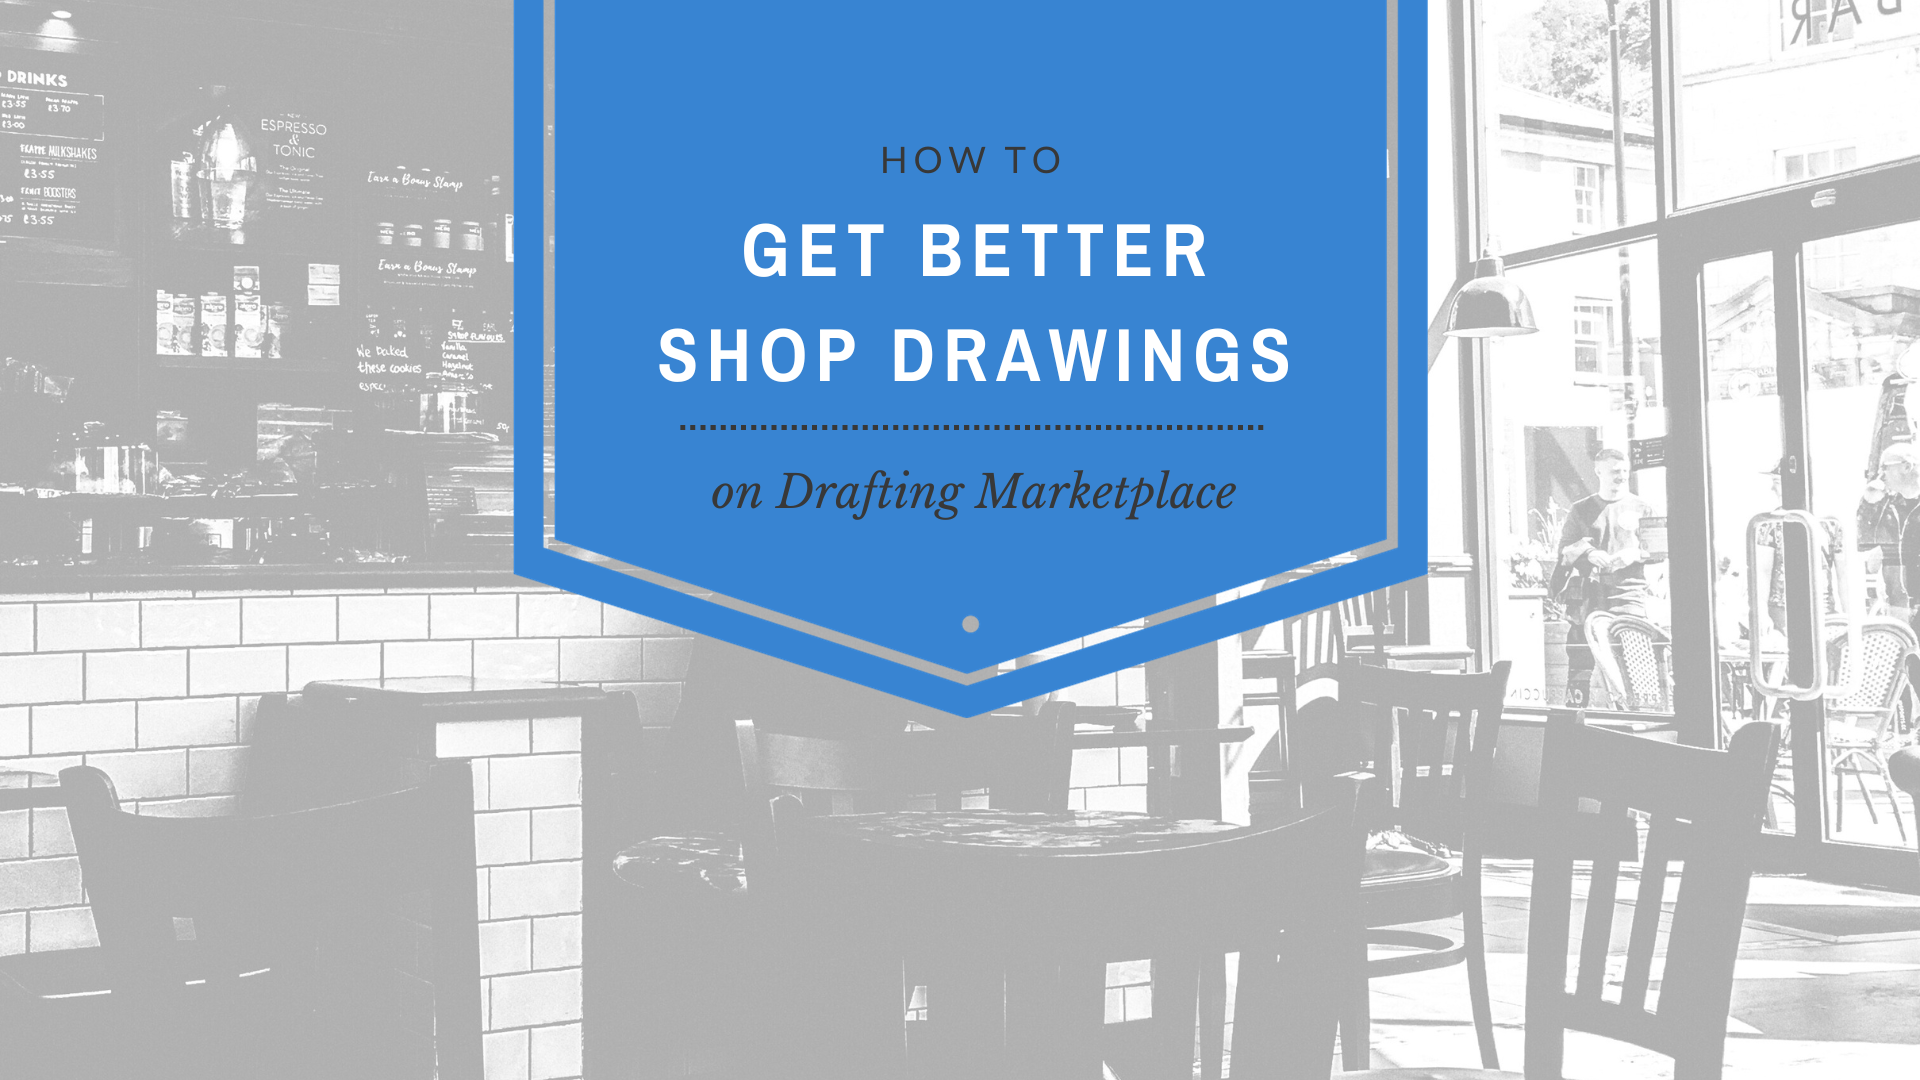 How To Get Better Shop Drawings on Drafting Marketplace